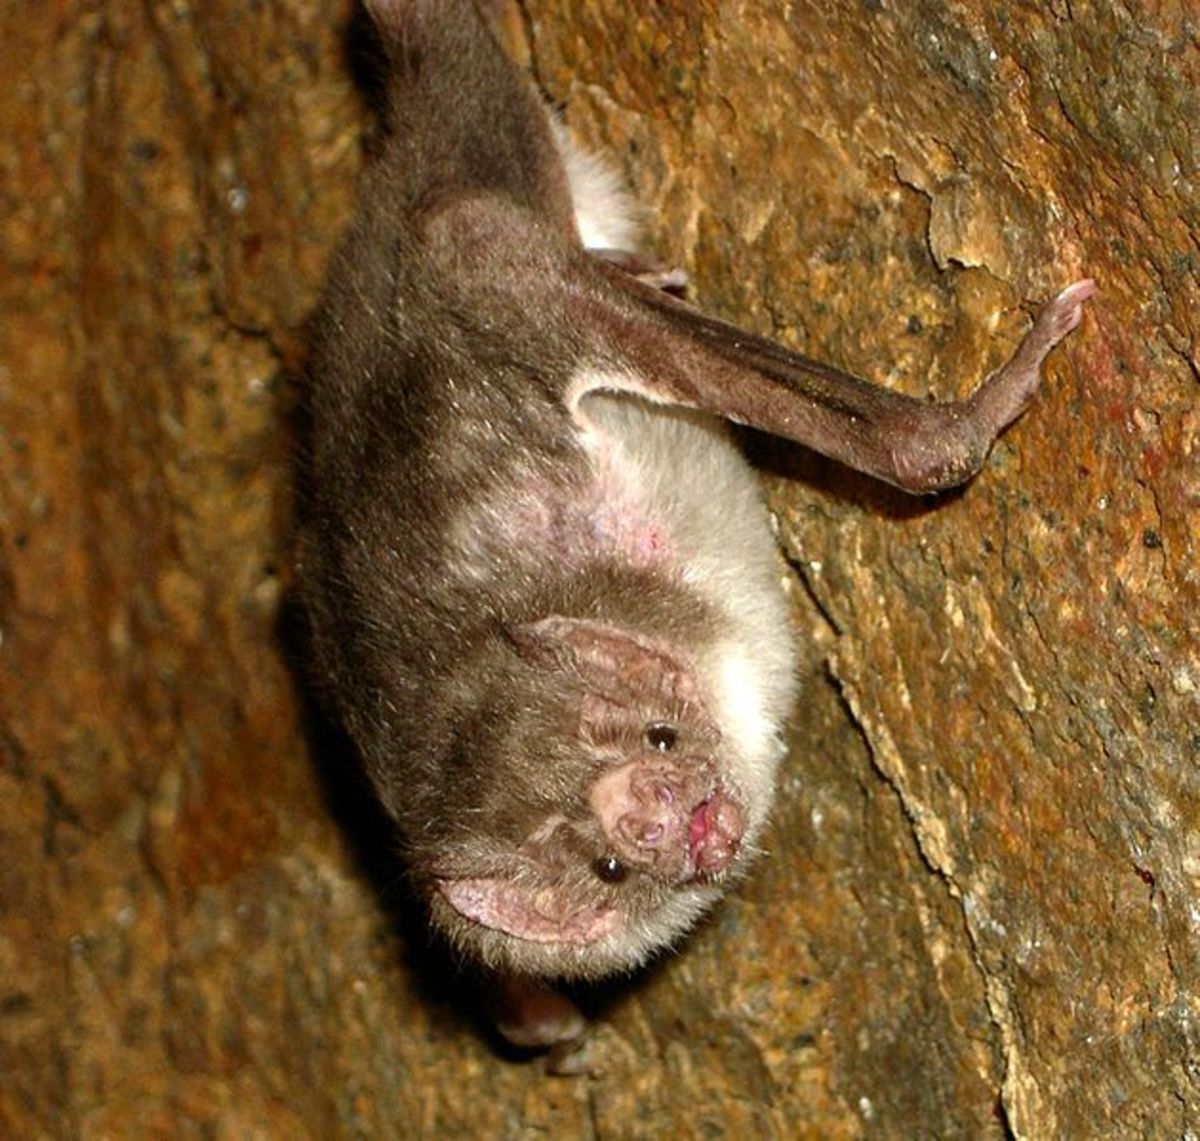 Vampire bats are feared as blood-thirsty demons of the night.